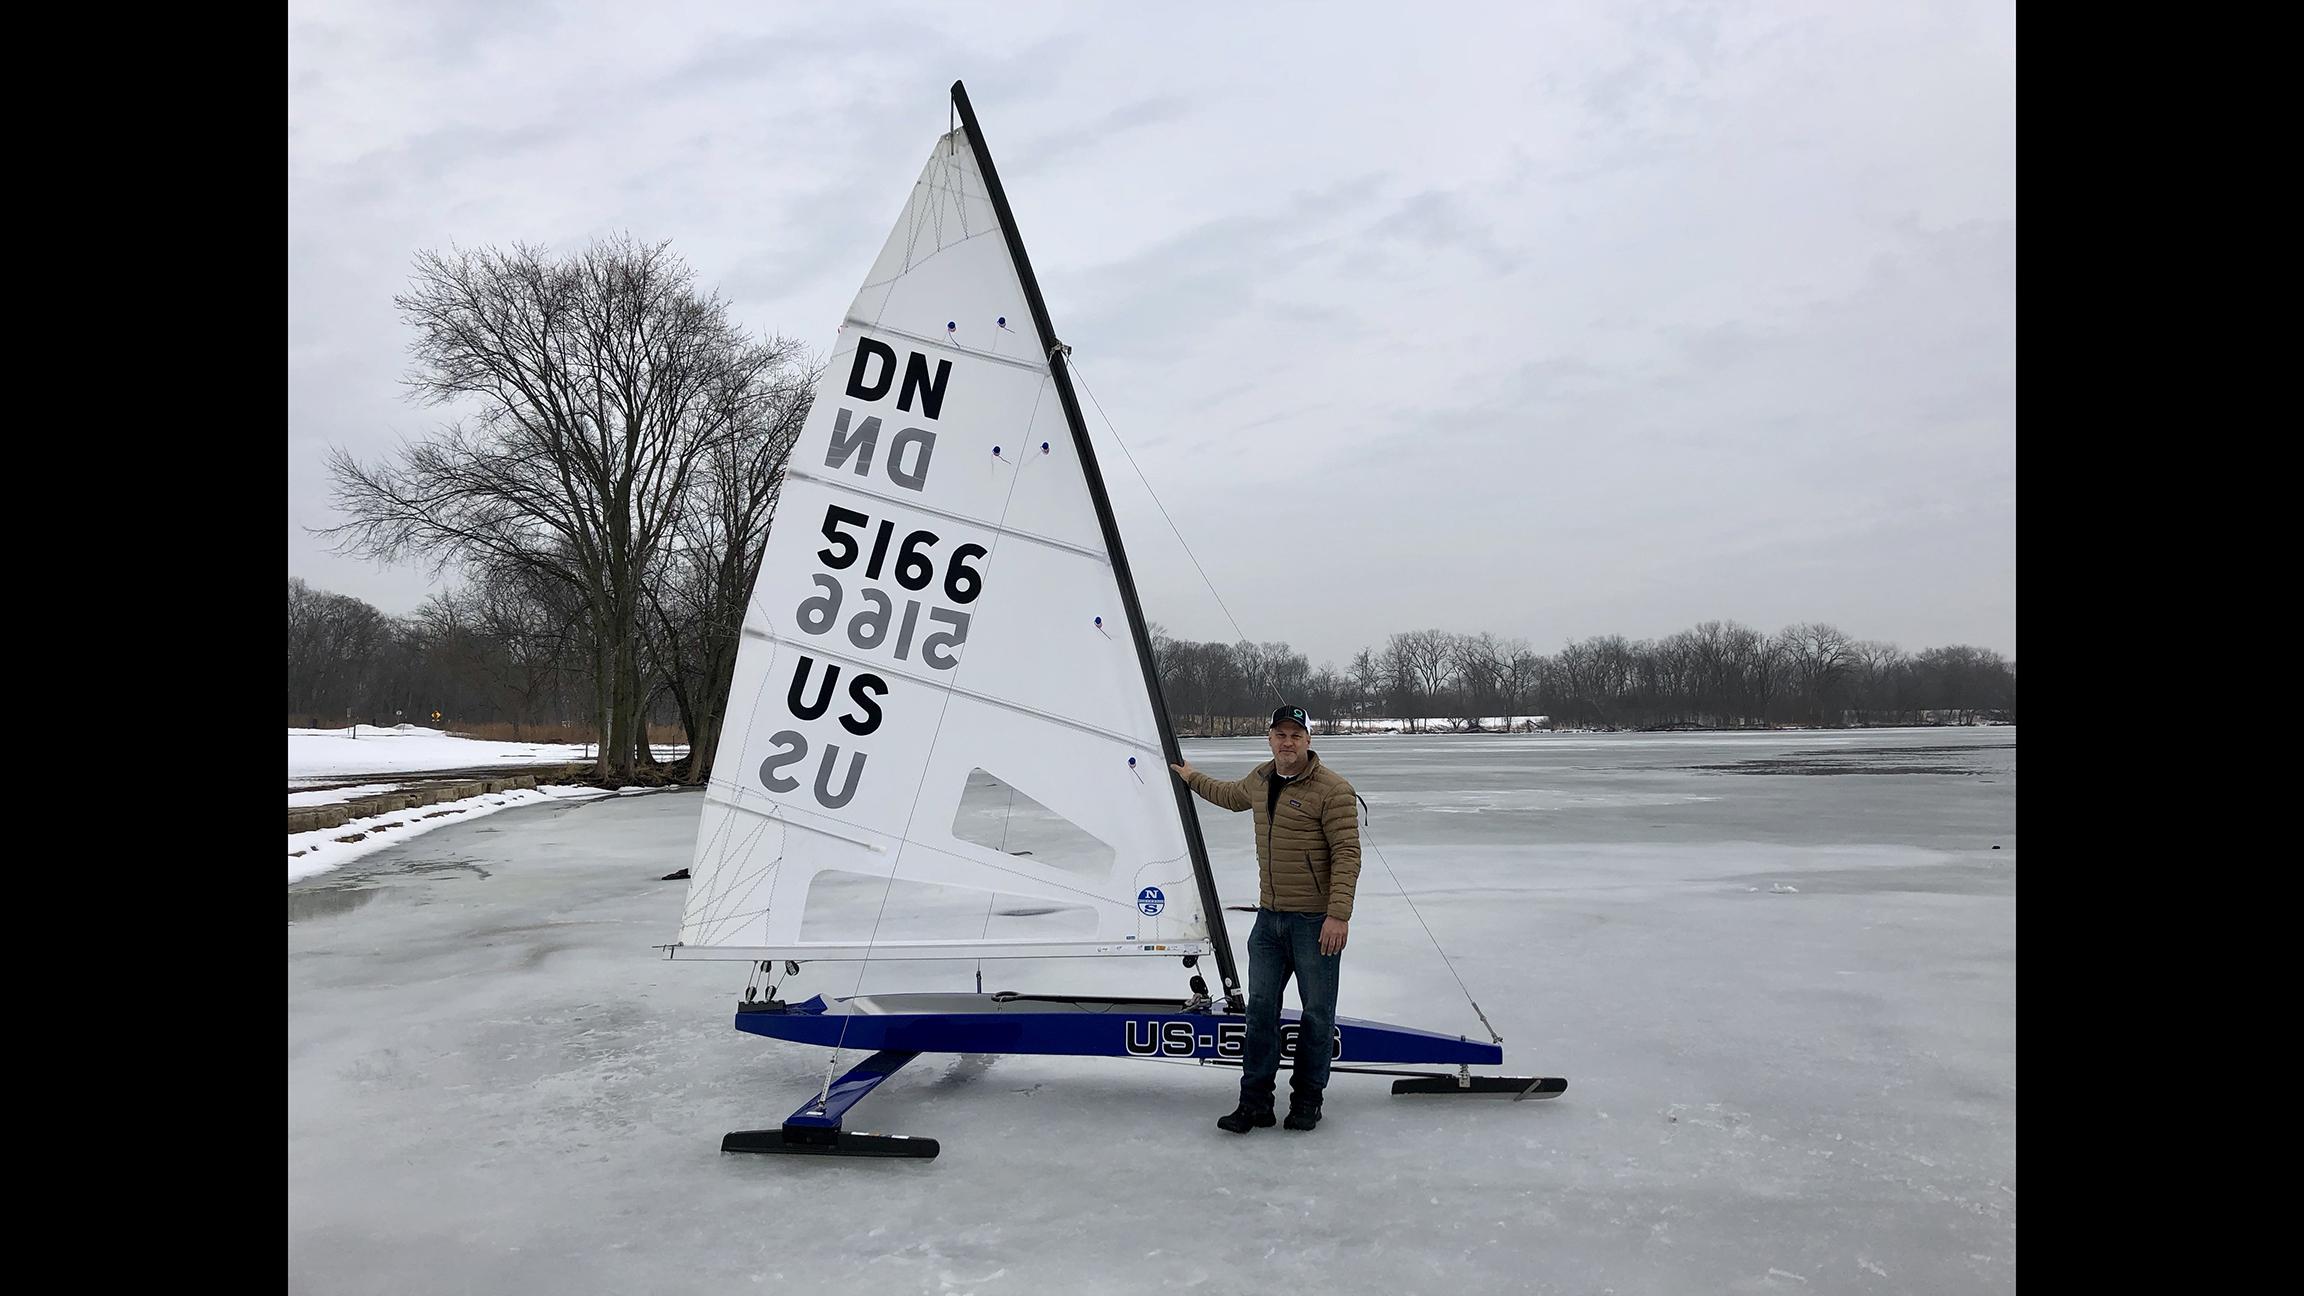 Chris Berger shows us his DN ice boat.